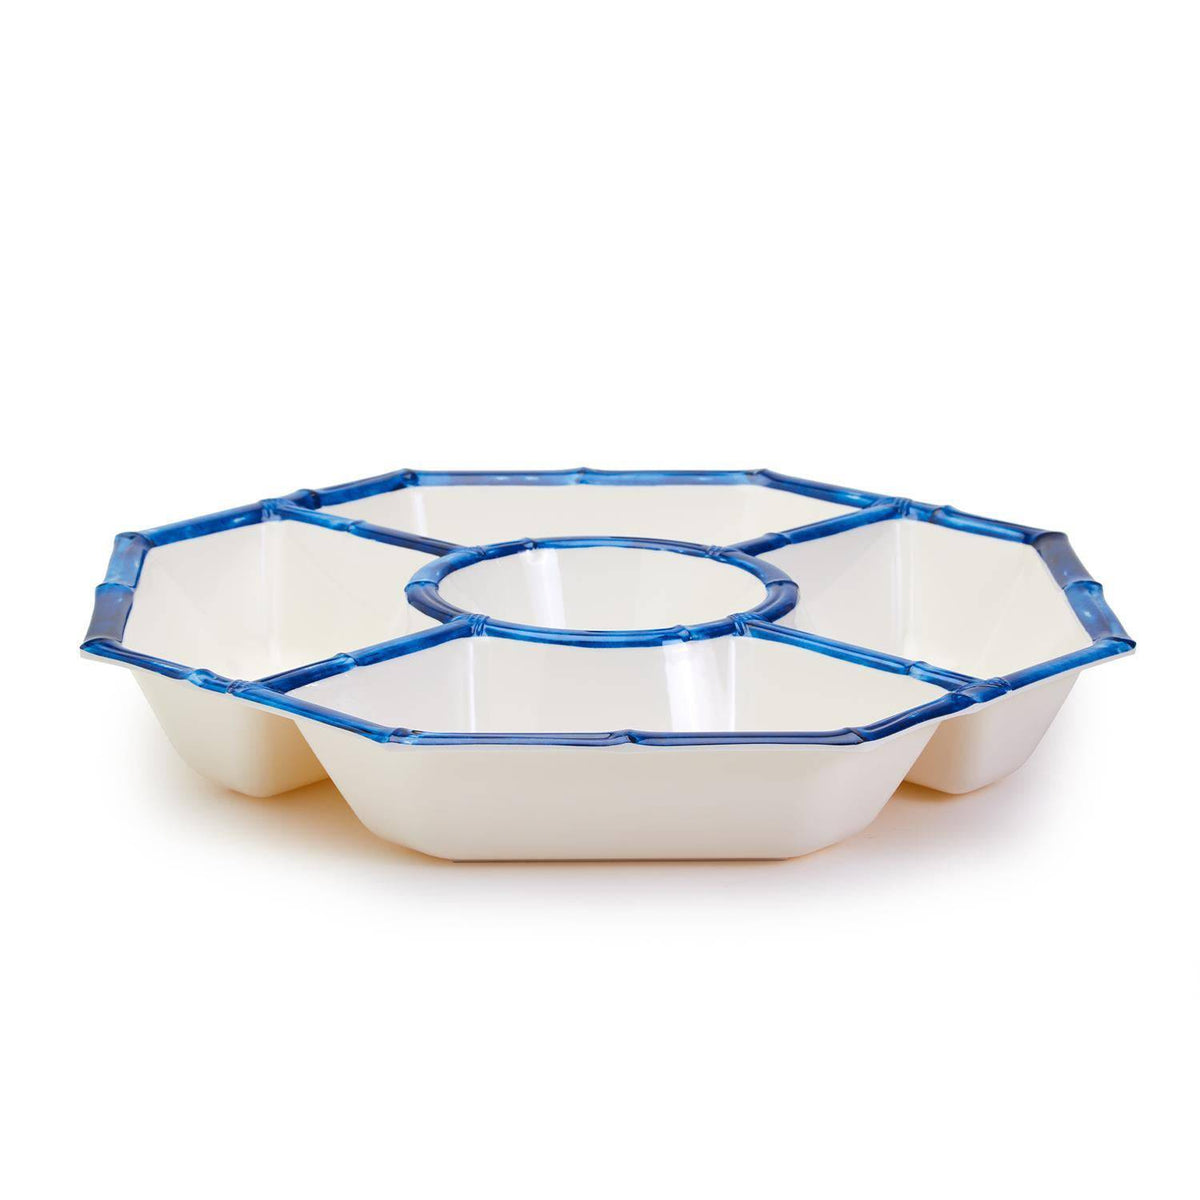 Blue Bamboo Divided Serving Tray - The Preppy Bunny